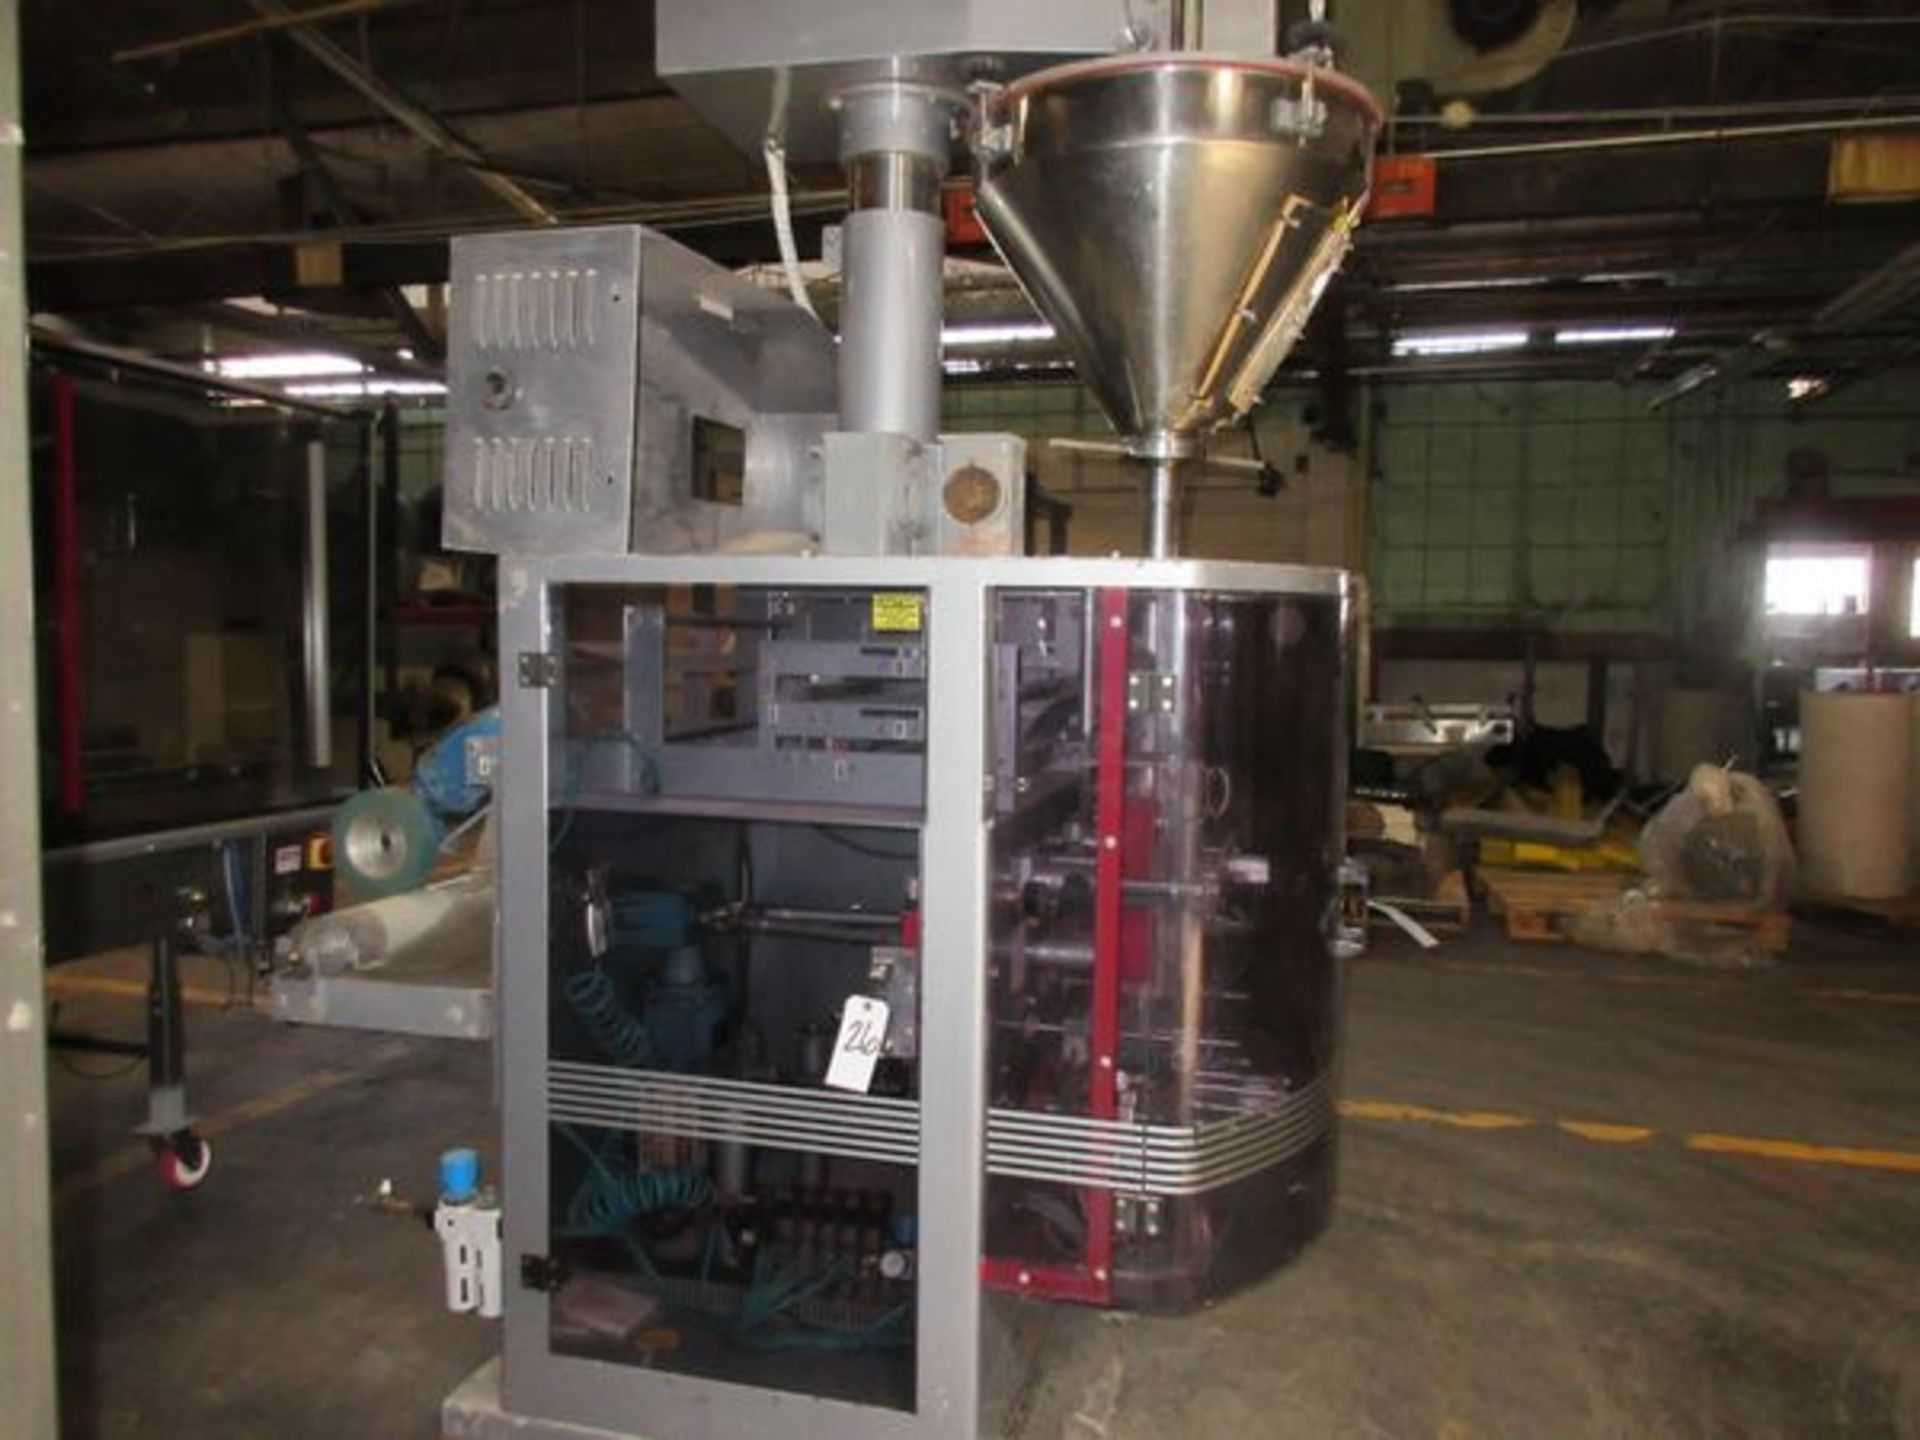 Avatar Taylor V2100 Vertical Form Fill and Seal with Powder Auger Filler 25 to 28 BP | Rig Fee $200 - Image 5 of 10